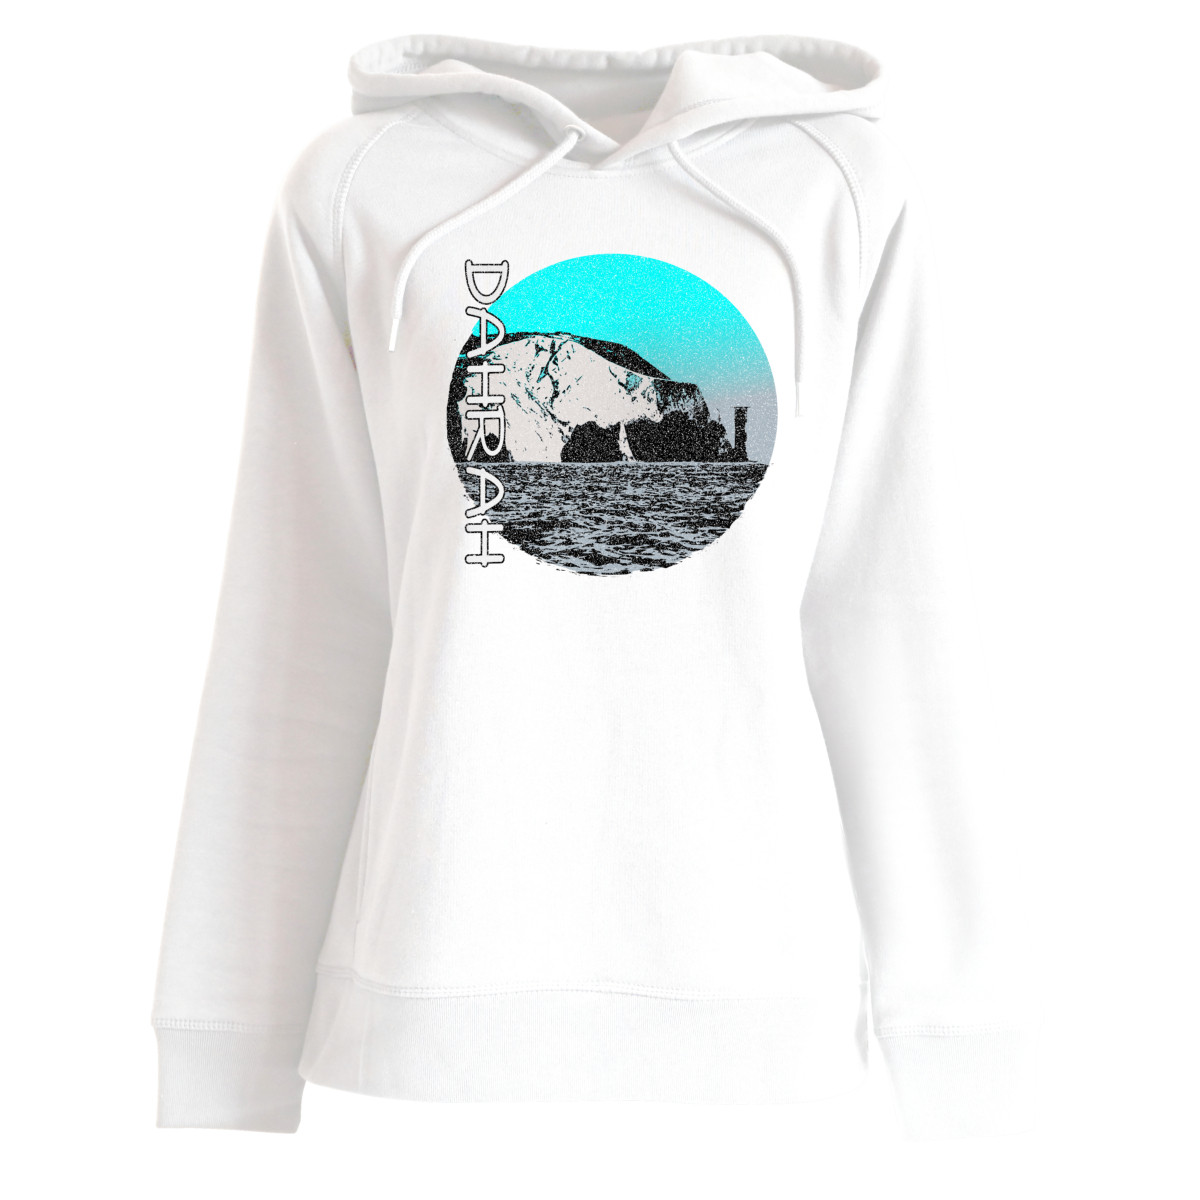 Dahrah Fashion unisex hoodie with print of the scenic coastline of the Isle of Wight